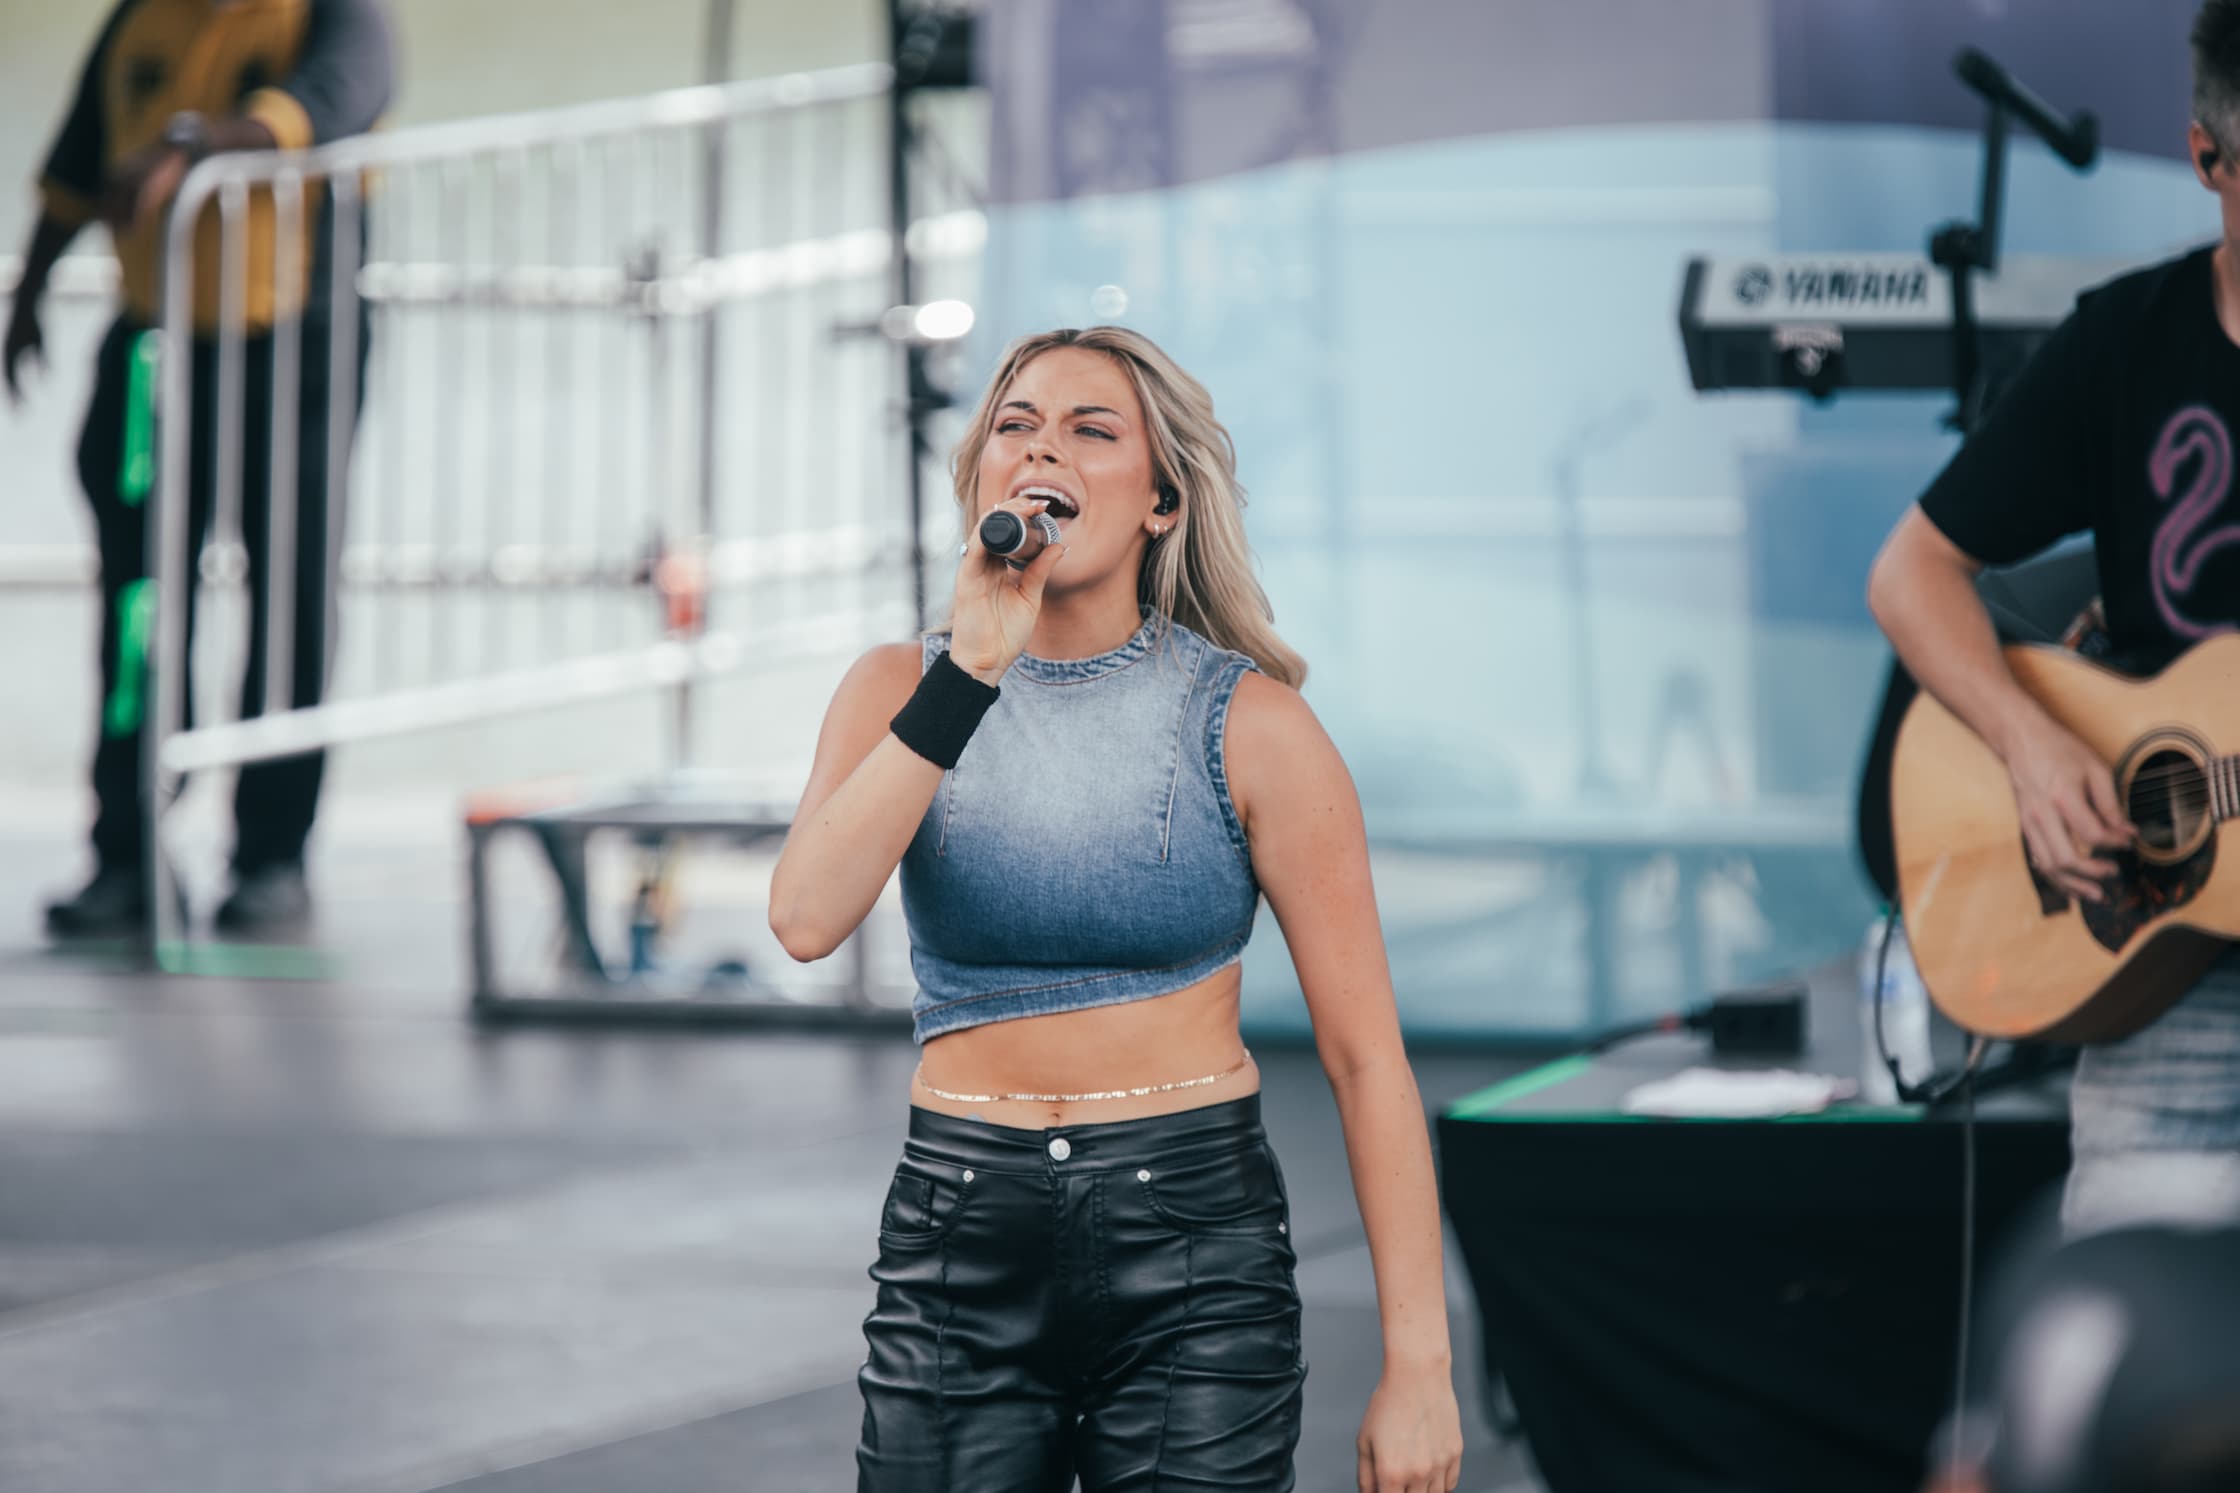 Alana Springsteen at CMA Fest 2023 by Laura Ord